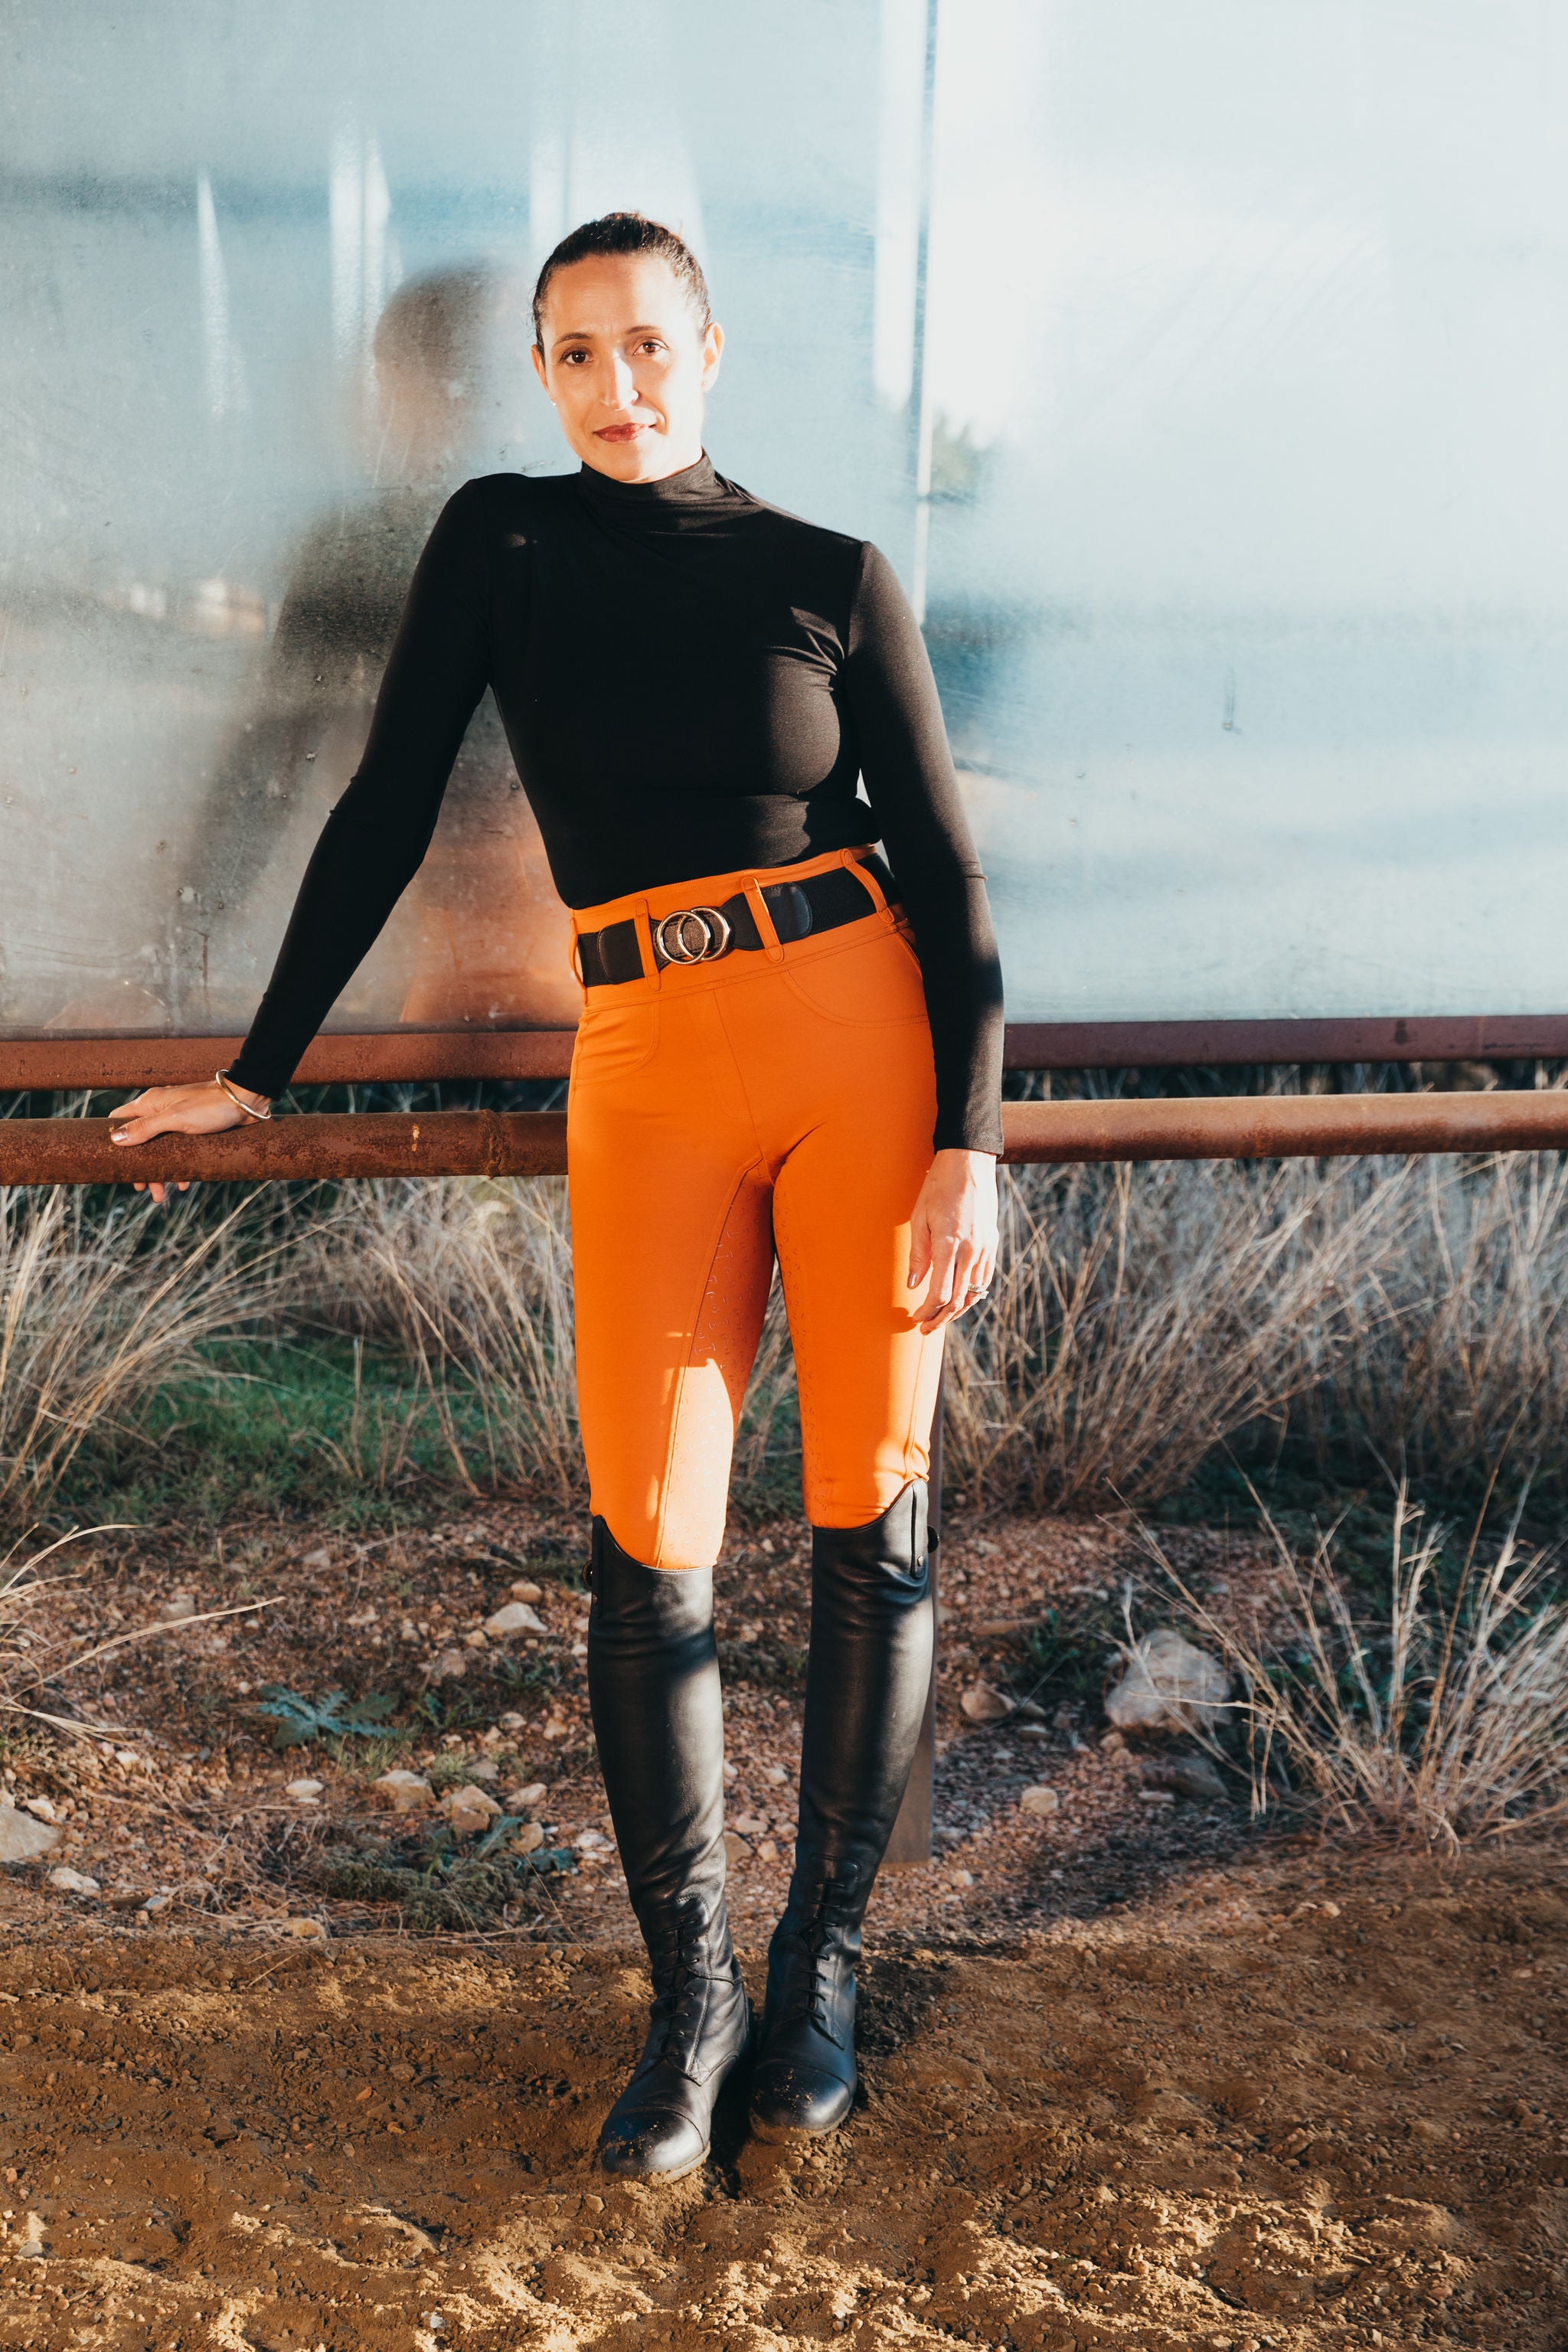 Equestrian women love Canter Culture's comfortable, soft riding tights that feature a high waist and 2" belt loops.